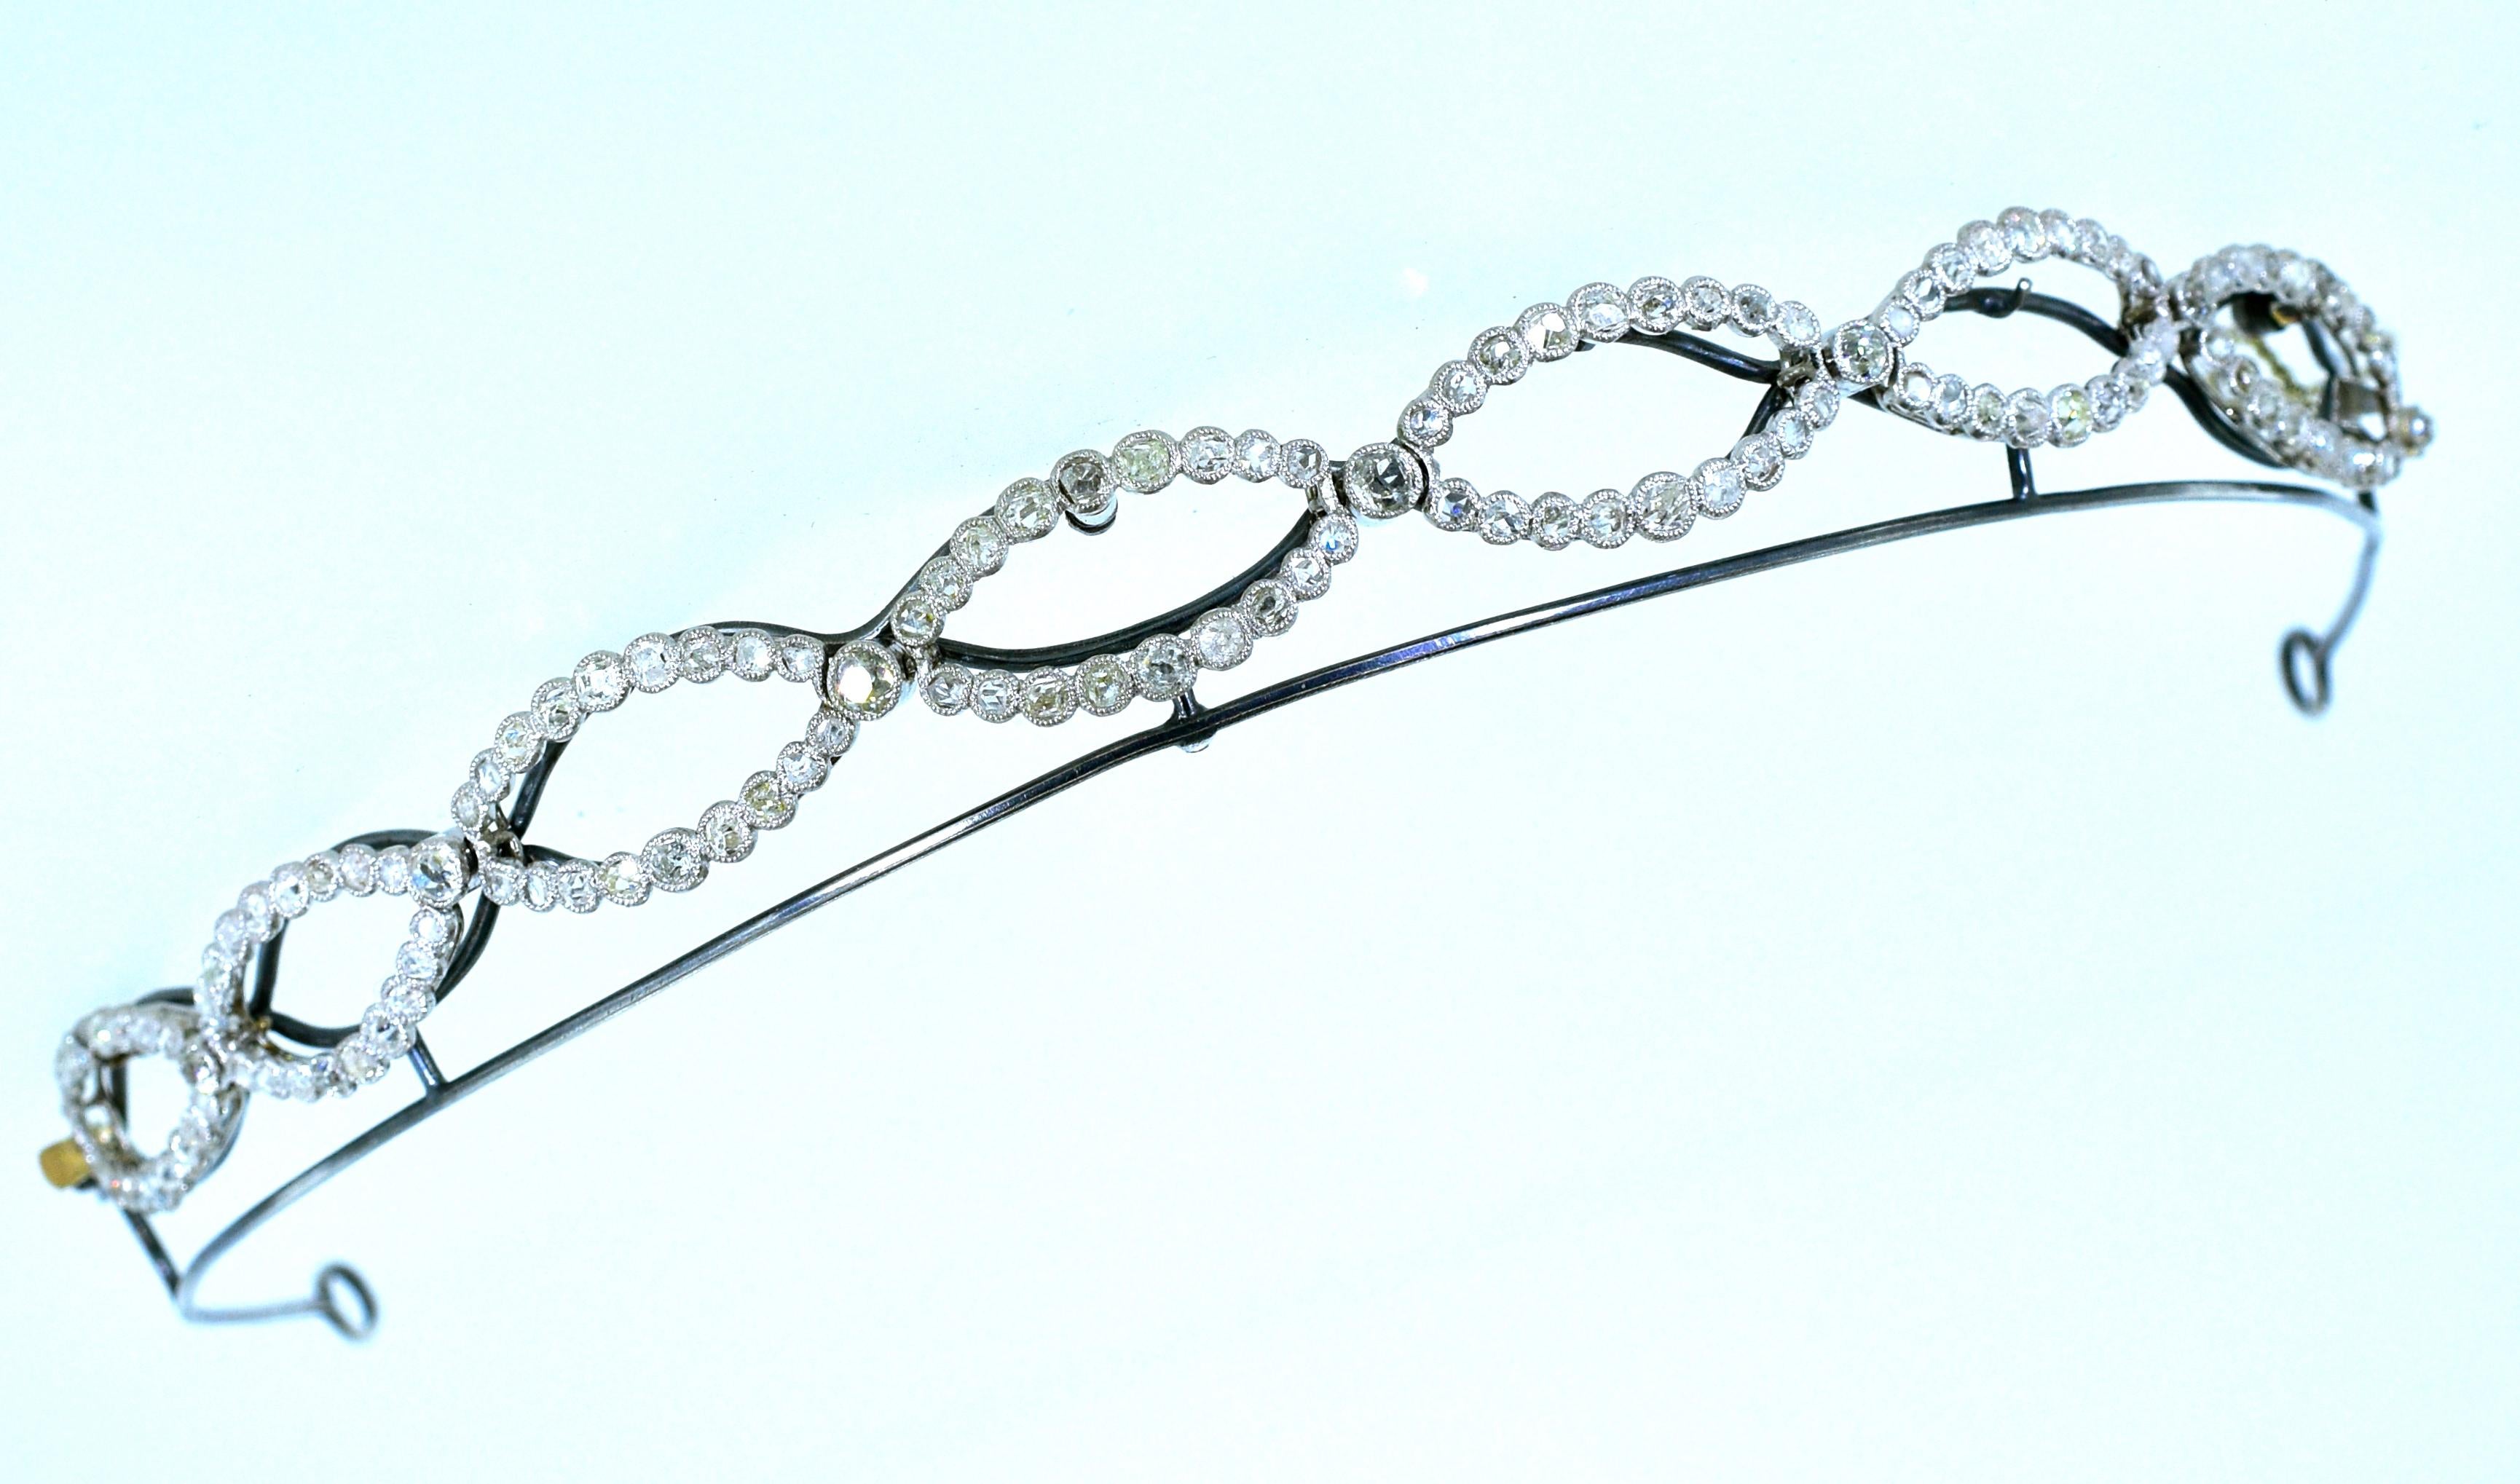 Platinum and diamond tiara/bracelet, circa 1890, this piece has both European cut diamonds and rose cut diamonds with approximately 5 cts.  One can easily remove the frame and wear the platinum piece as a bracelet.  